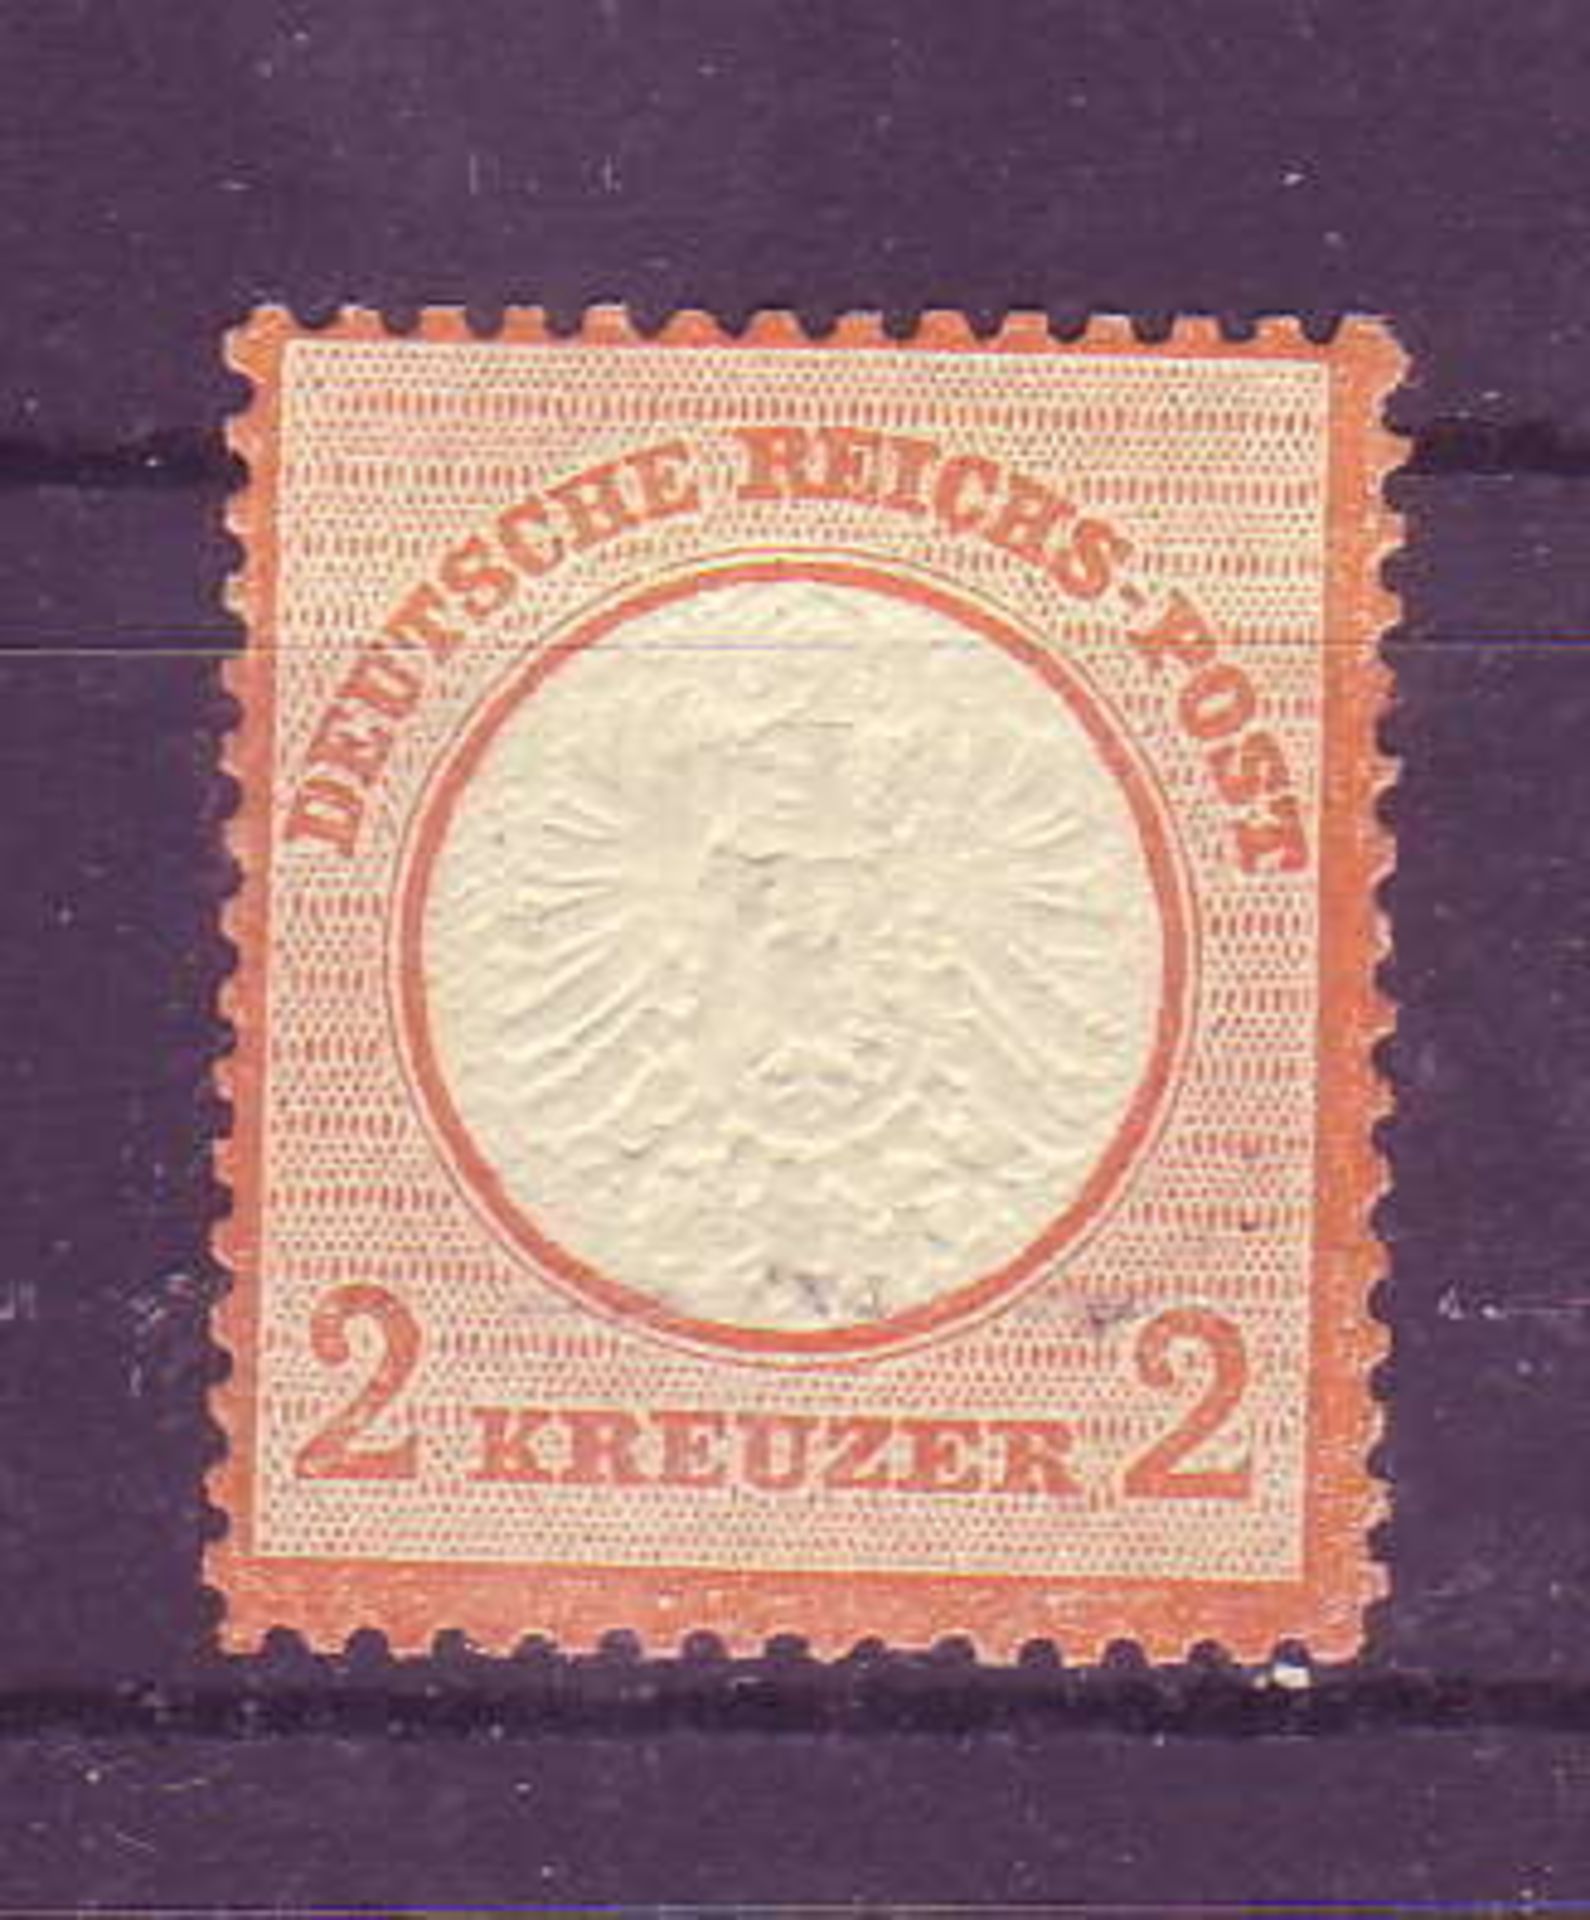 German Empire, Michel - No. 24, 2 Kr., Large shield. Attractive brand with a clear character.